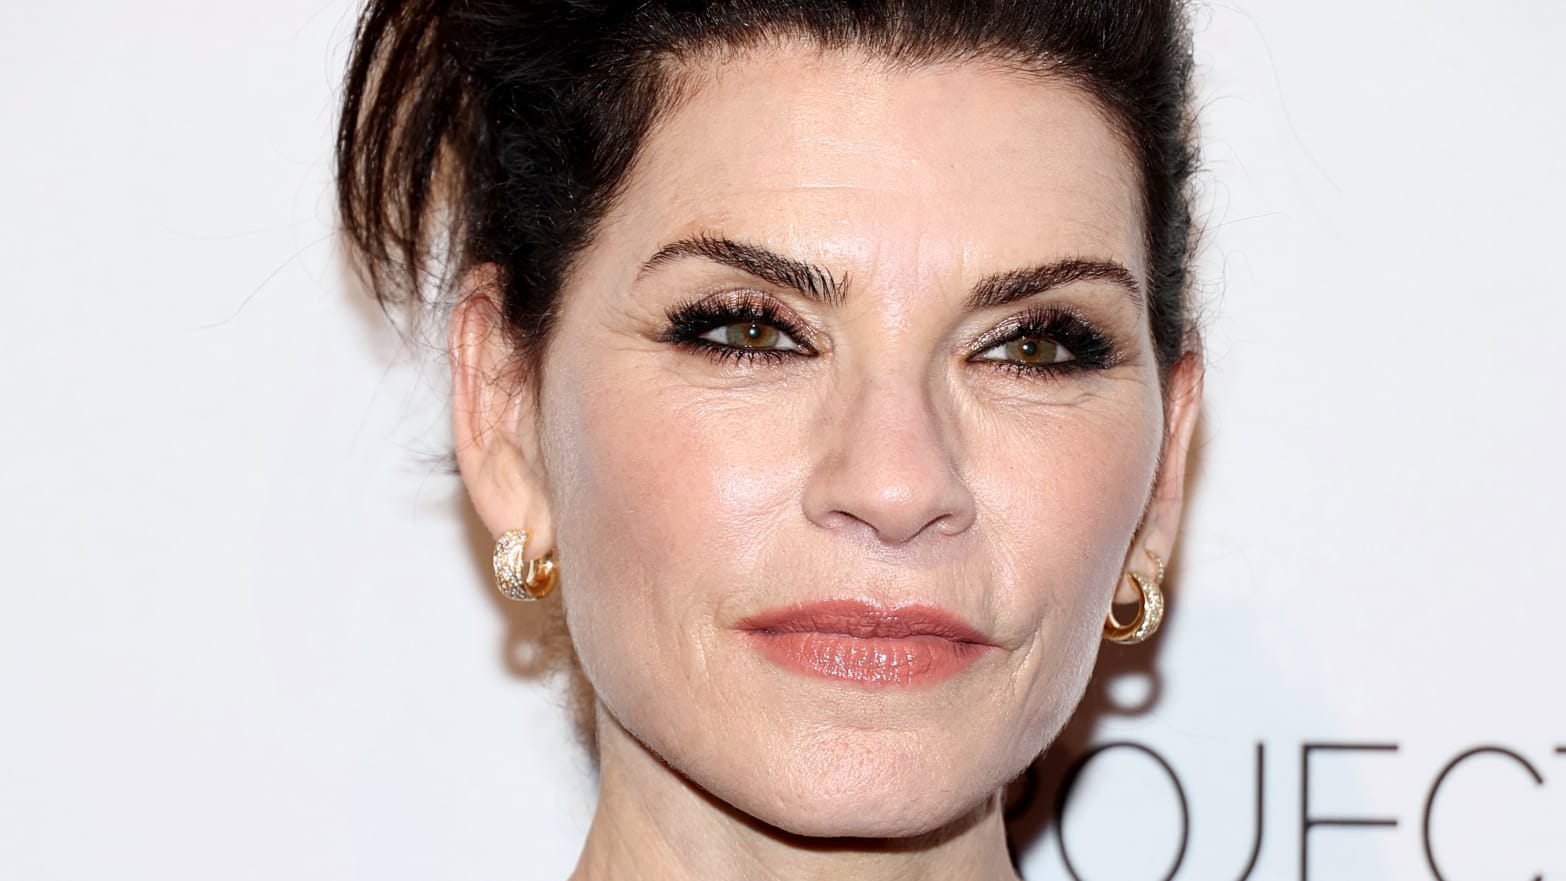 Julianna Margulies attends the Project ALS 25th Anniversary Gala